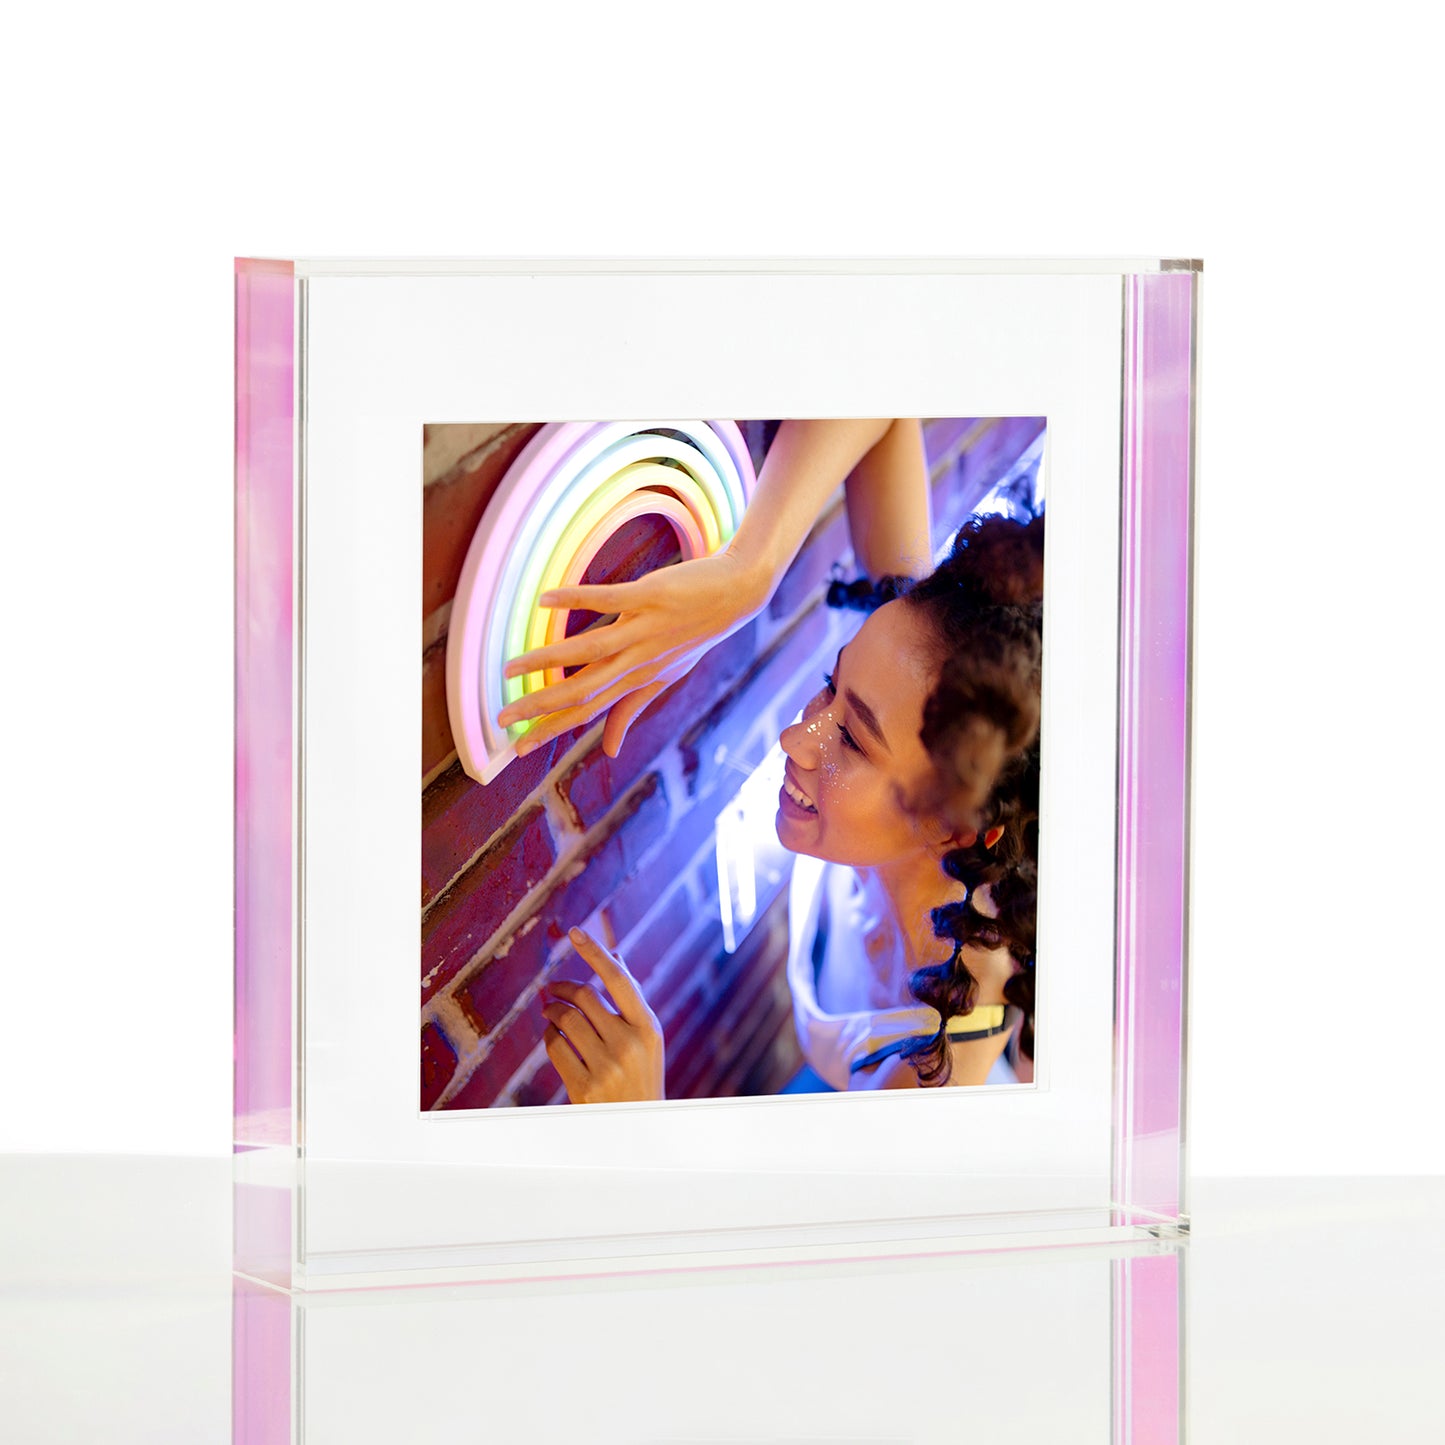 Case Pack of Five Float Frame for Tabletop or Wall with Magnetic Photo Holder (CHOOSE YOUR SIZE)